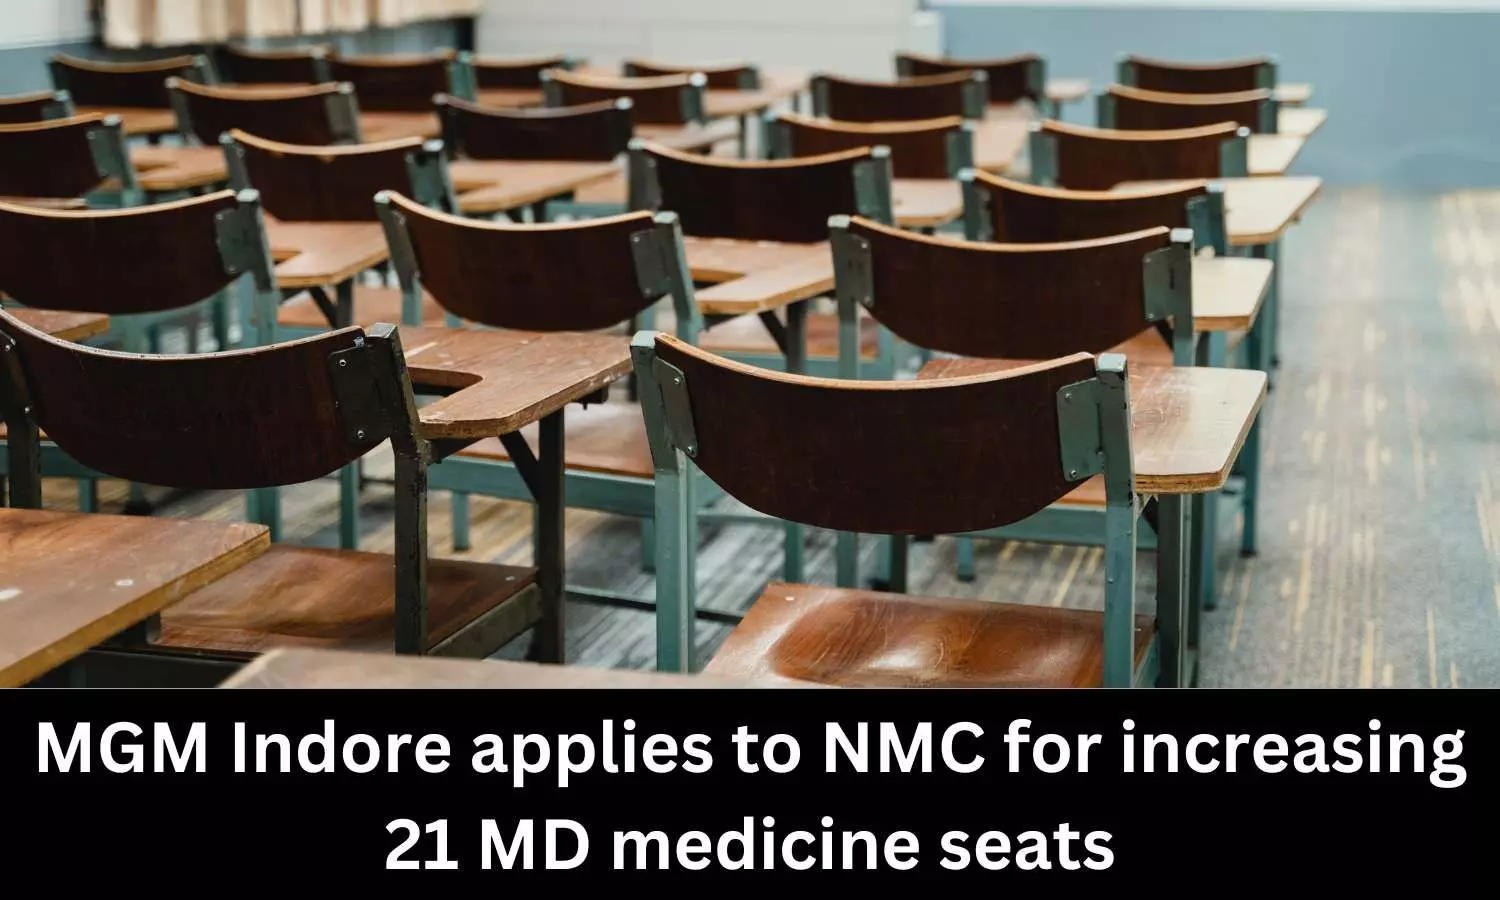 MGM Indore seeks NMC nod for addition of 21 MD Medicine Seats